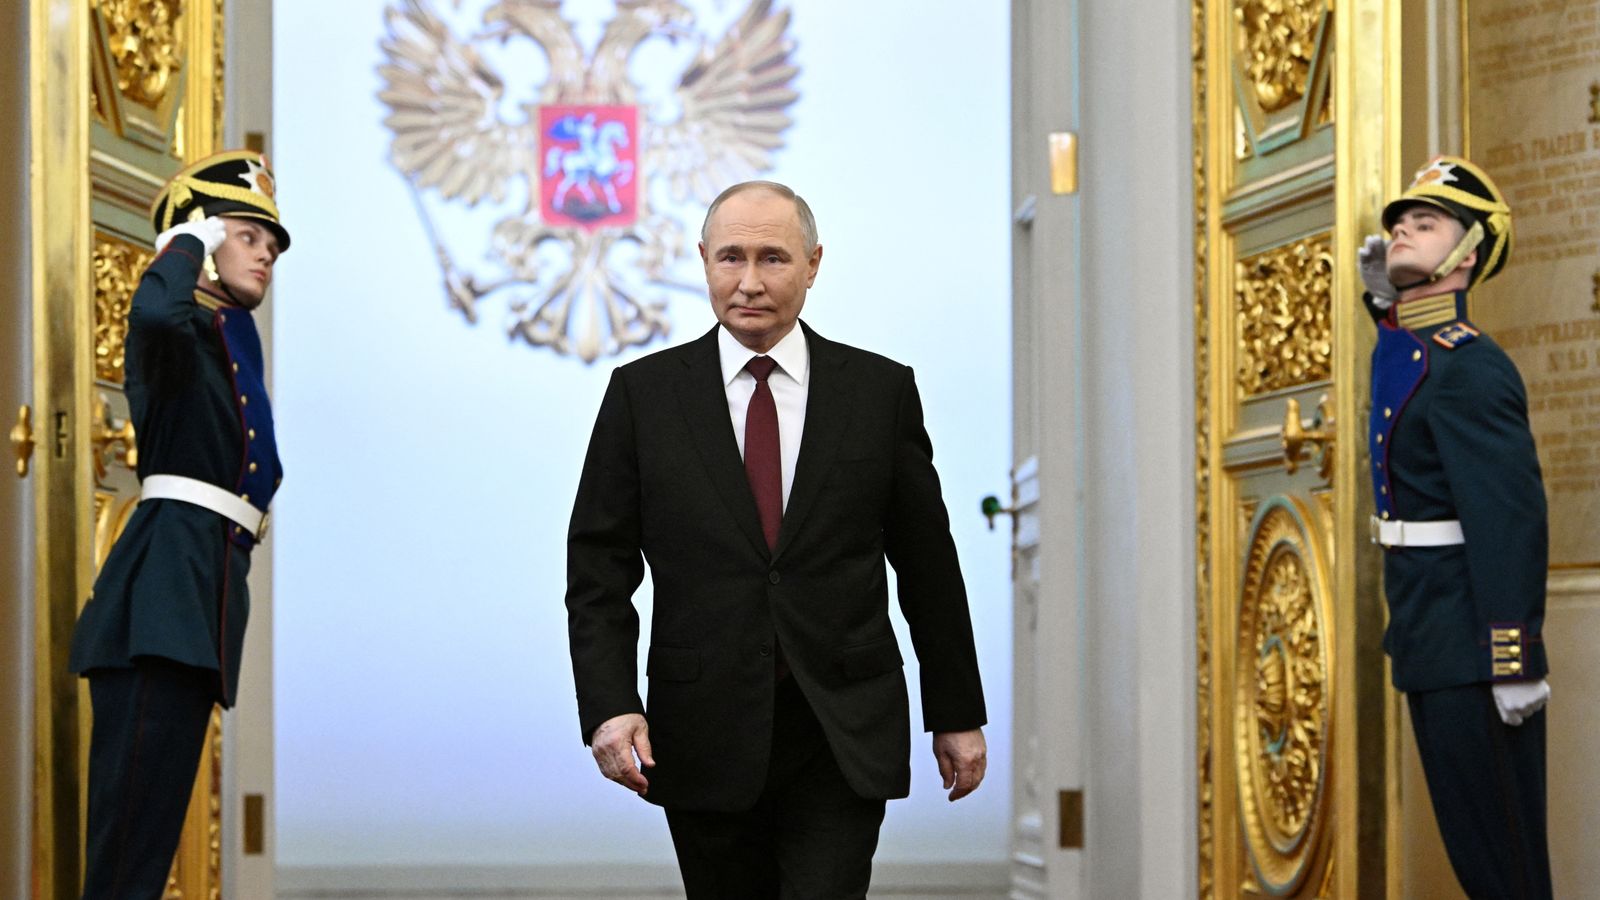 Vladimir Putin thanks soldiers 'fighting for motherland' as he is inaugurated for fifth time